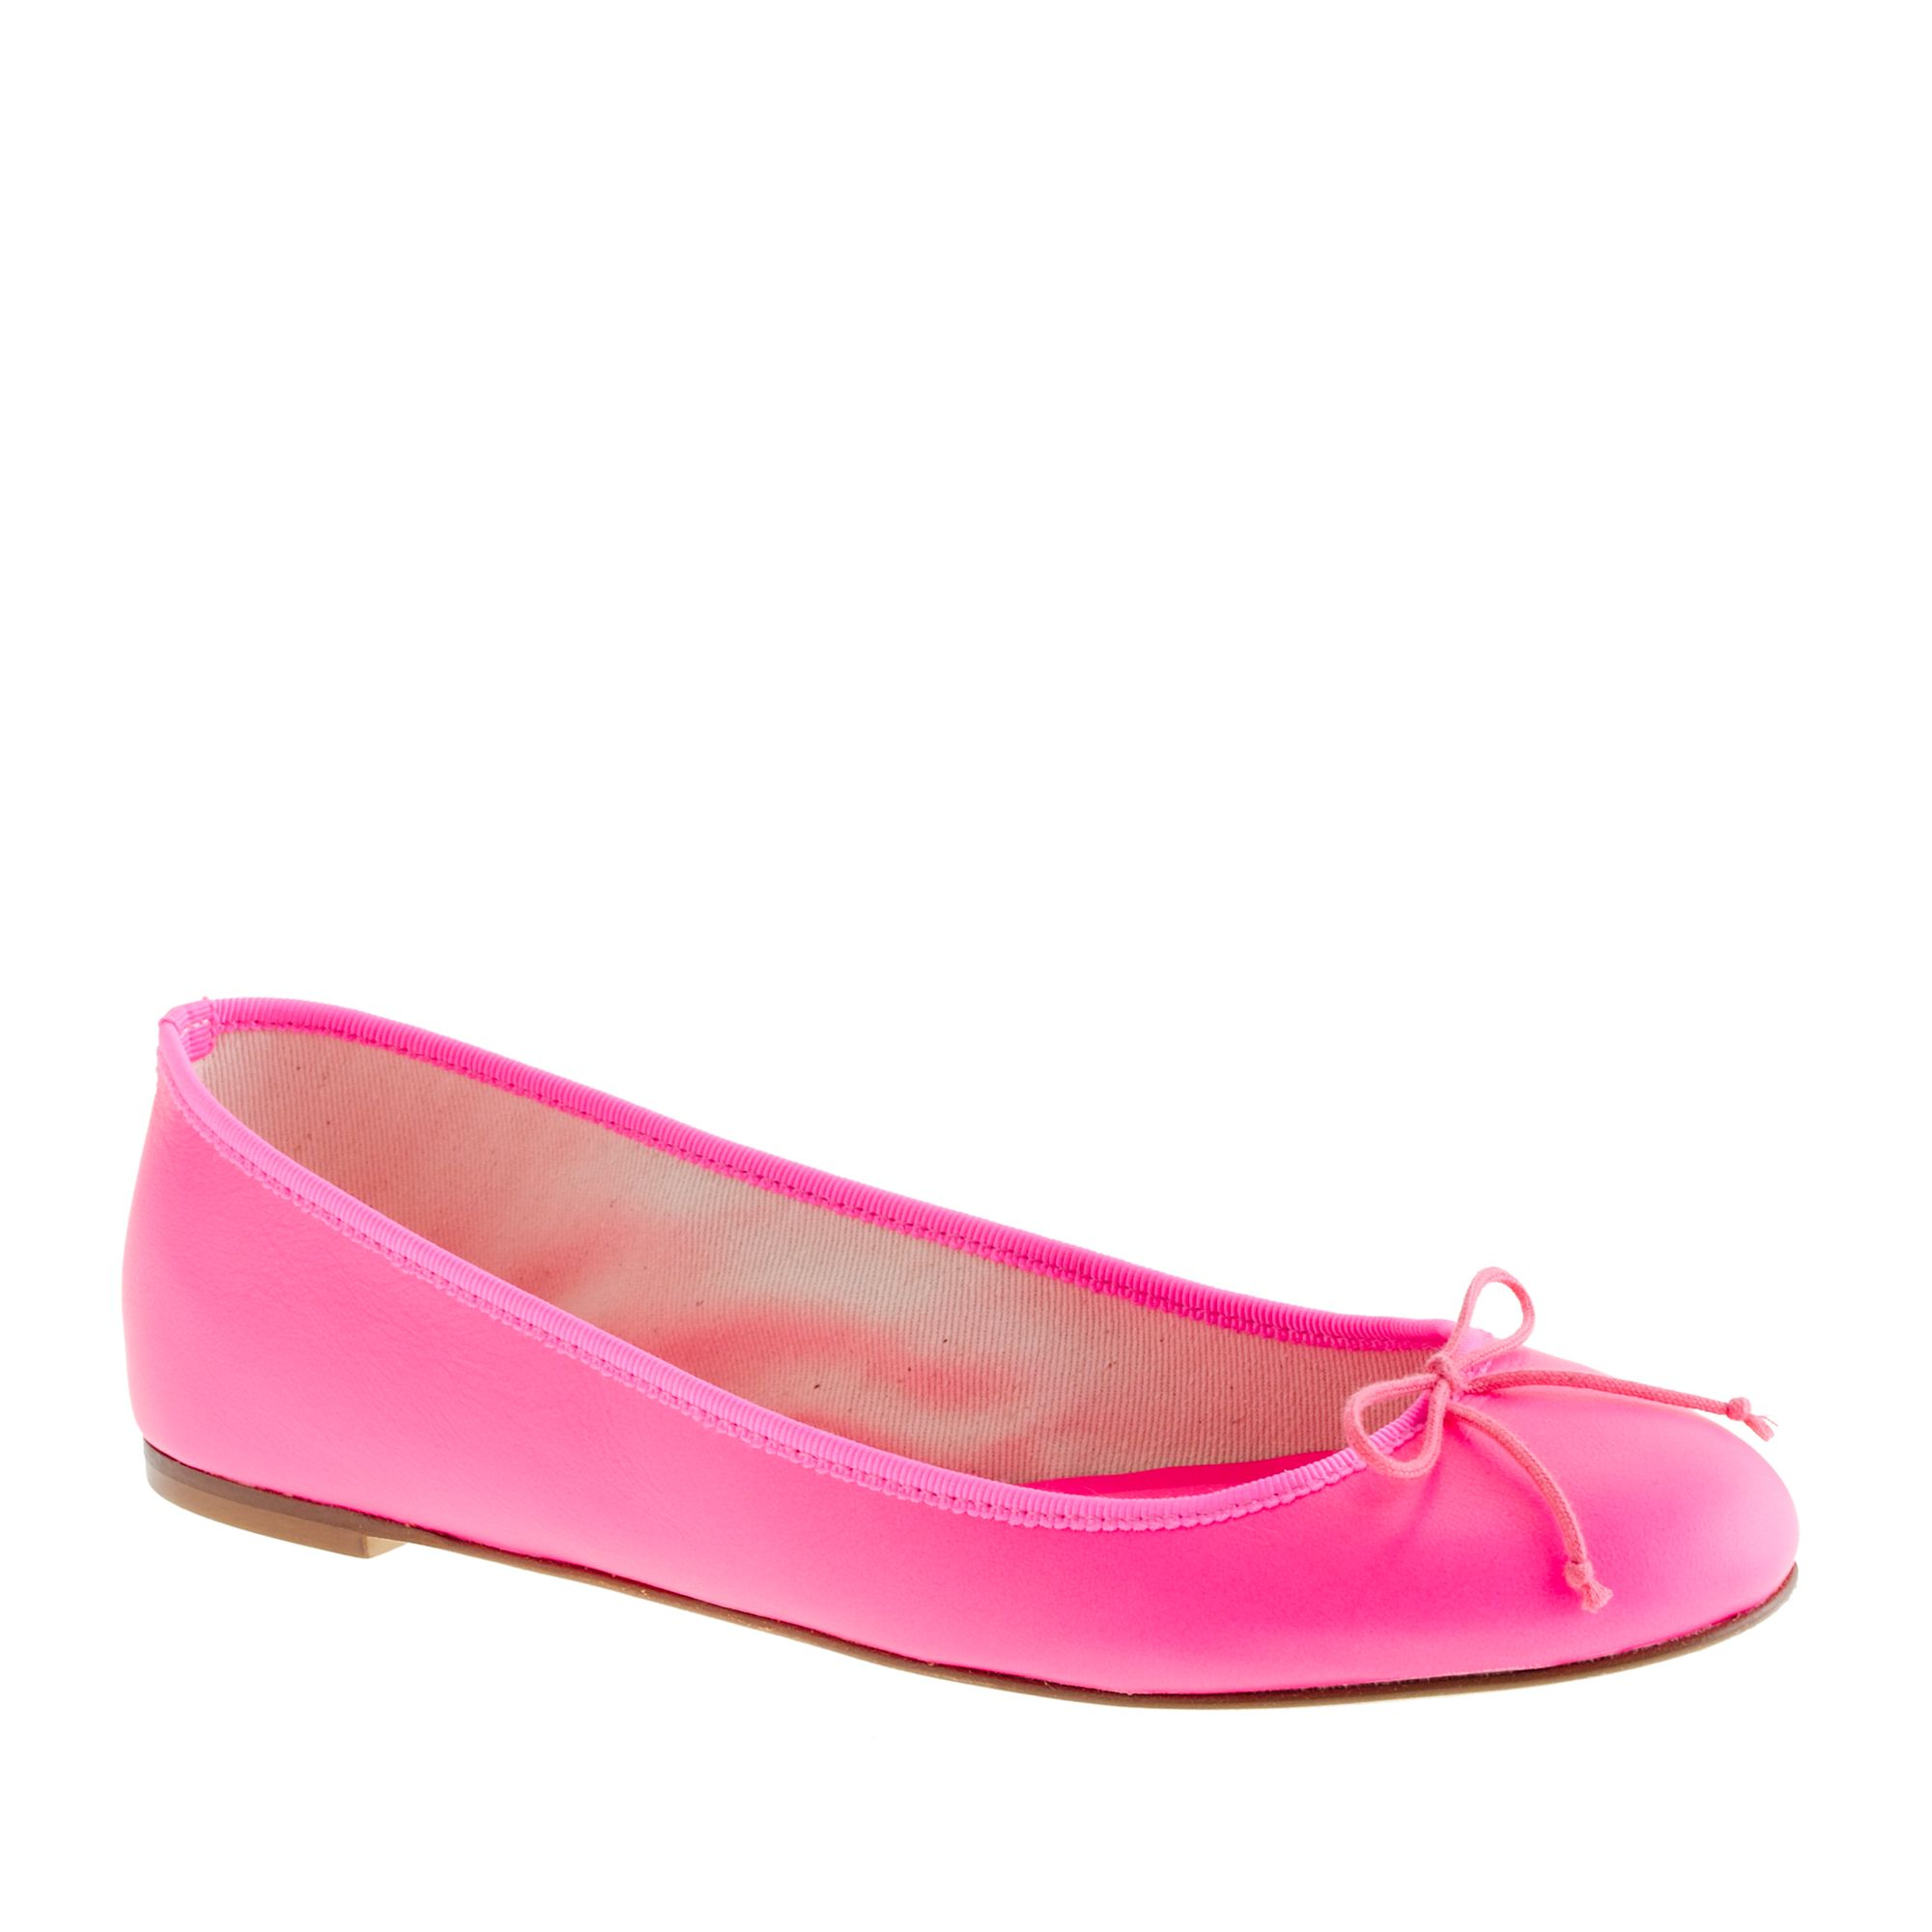 Lyst Jcrew Classic Leather Ballet Flats In Pink